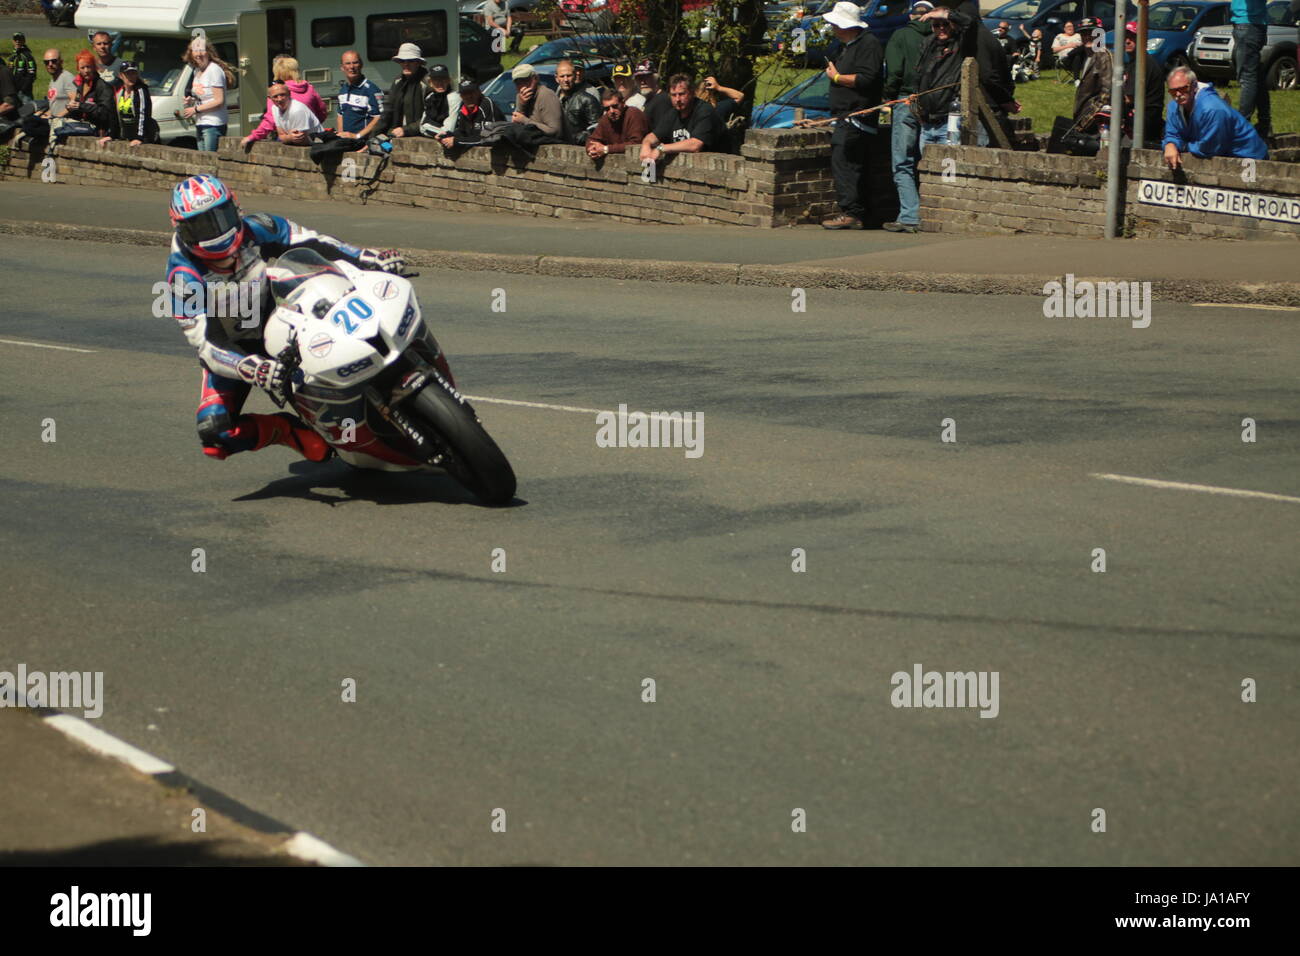 Isle of Man TT Races, Qualifying Practice Race, Saturday 3 June 2017.Sidecar Qualifying and Supersport/Lightweight/Newcomers (all classes) qualifying session. Number 20, Daniel Cooper of the Ruby Site Services Honda team from Stroud, UK. Credit: Eclectic Art and Photography/Alamy Live News Stock Photo